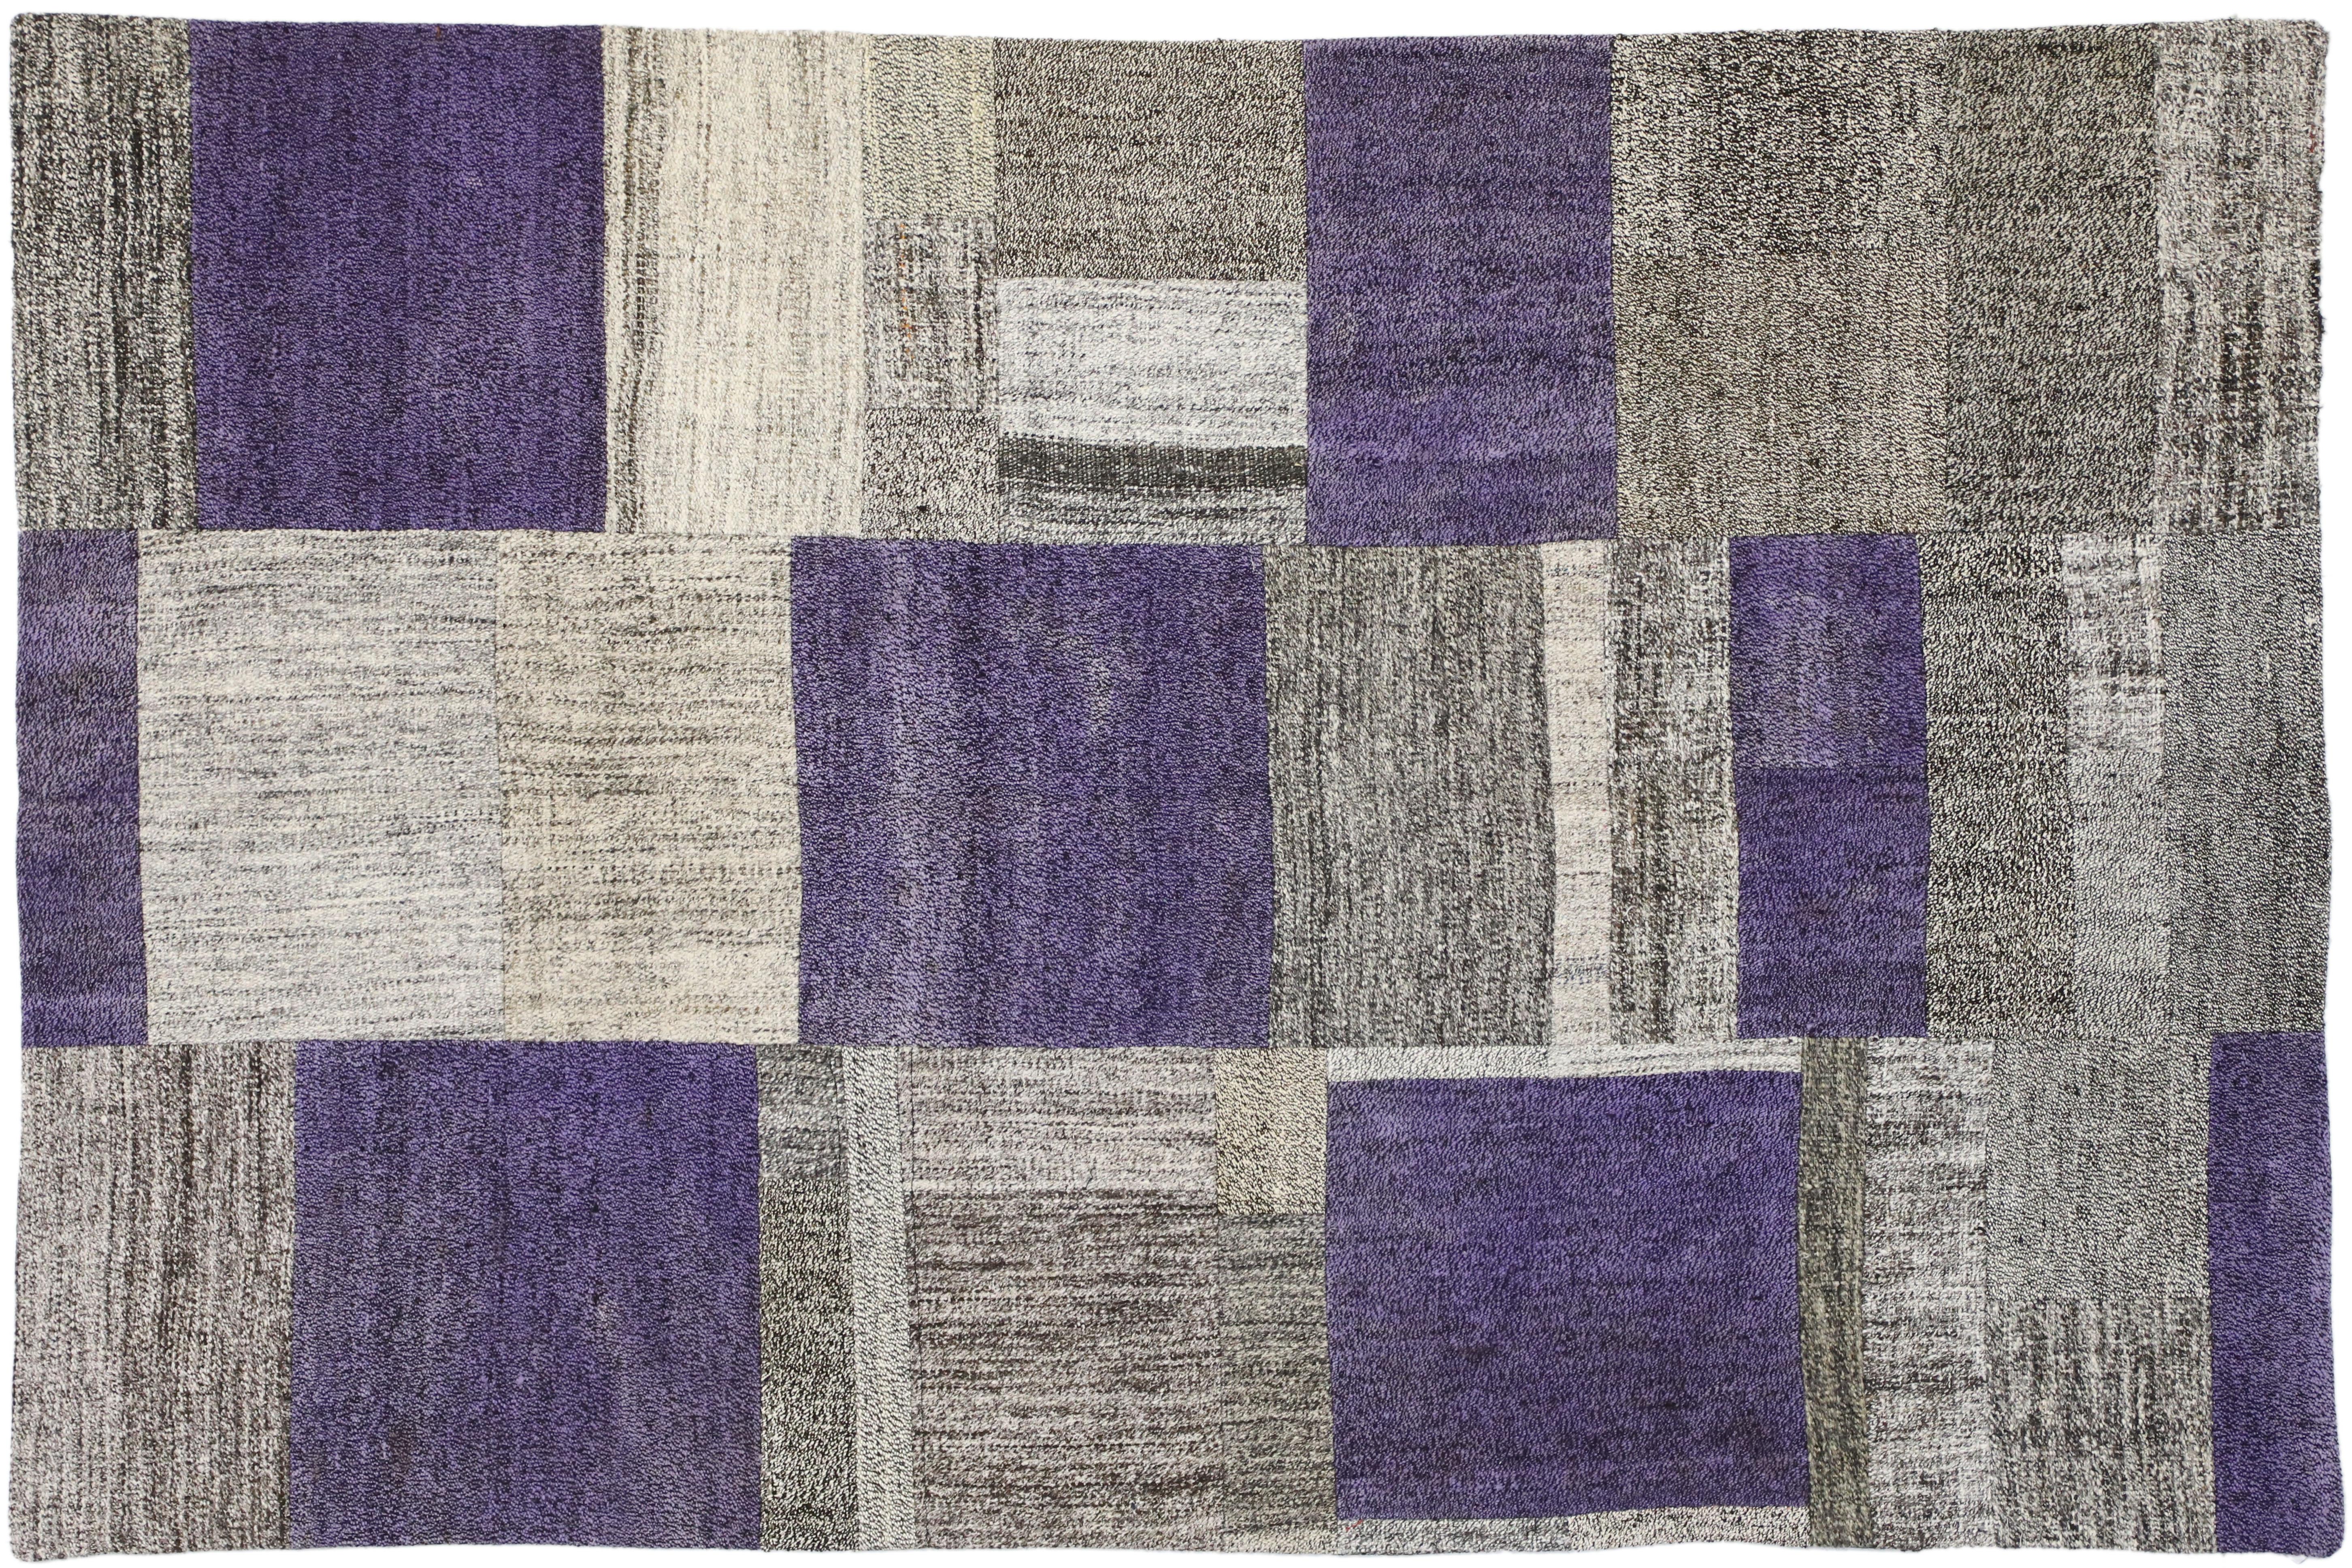 51583, Turkish Pala Patchwork Kilim rug. Mixing various patterns and colors create a stunning design in this Pala Patchwork Kilim rug. Featuring both wide and narrow bands in fun colors, stripes are a classic pattern. Rendered in variegated shades